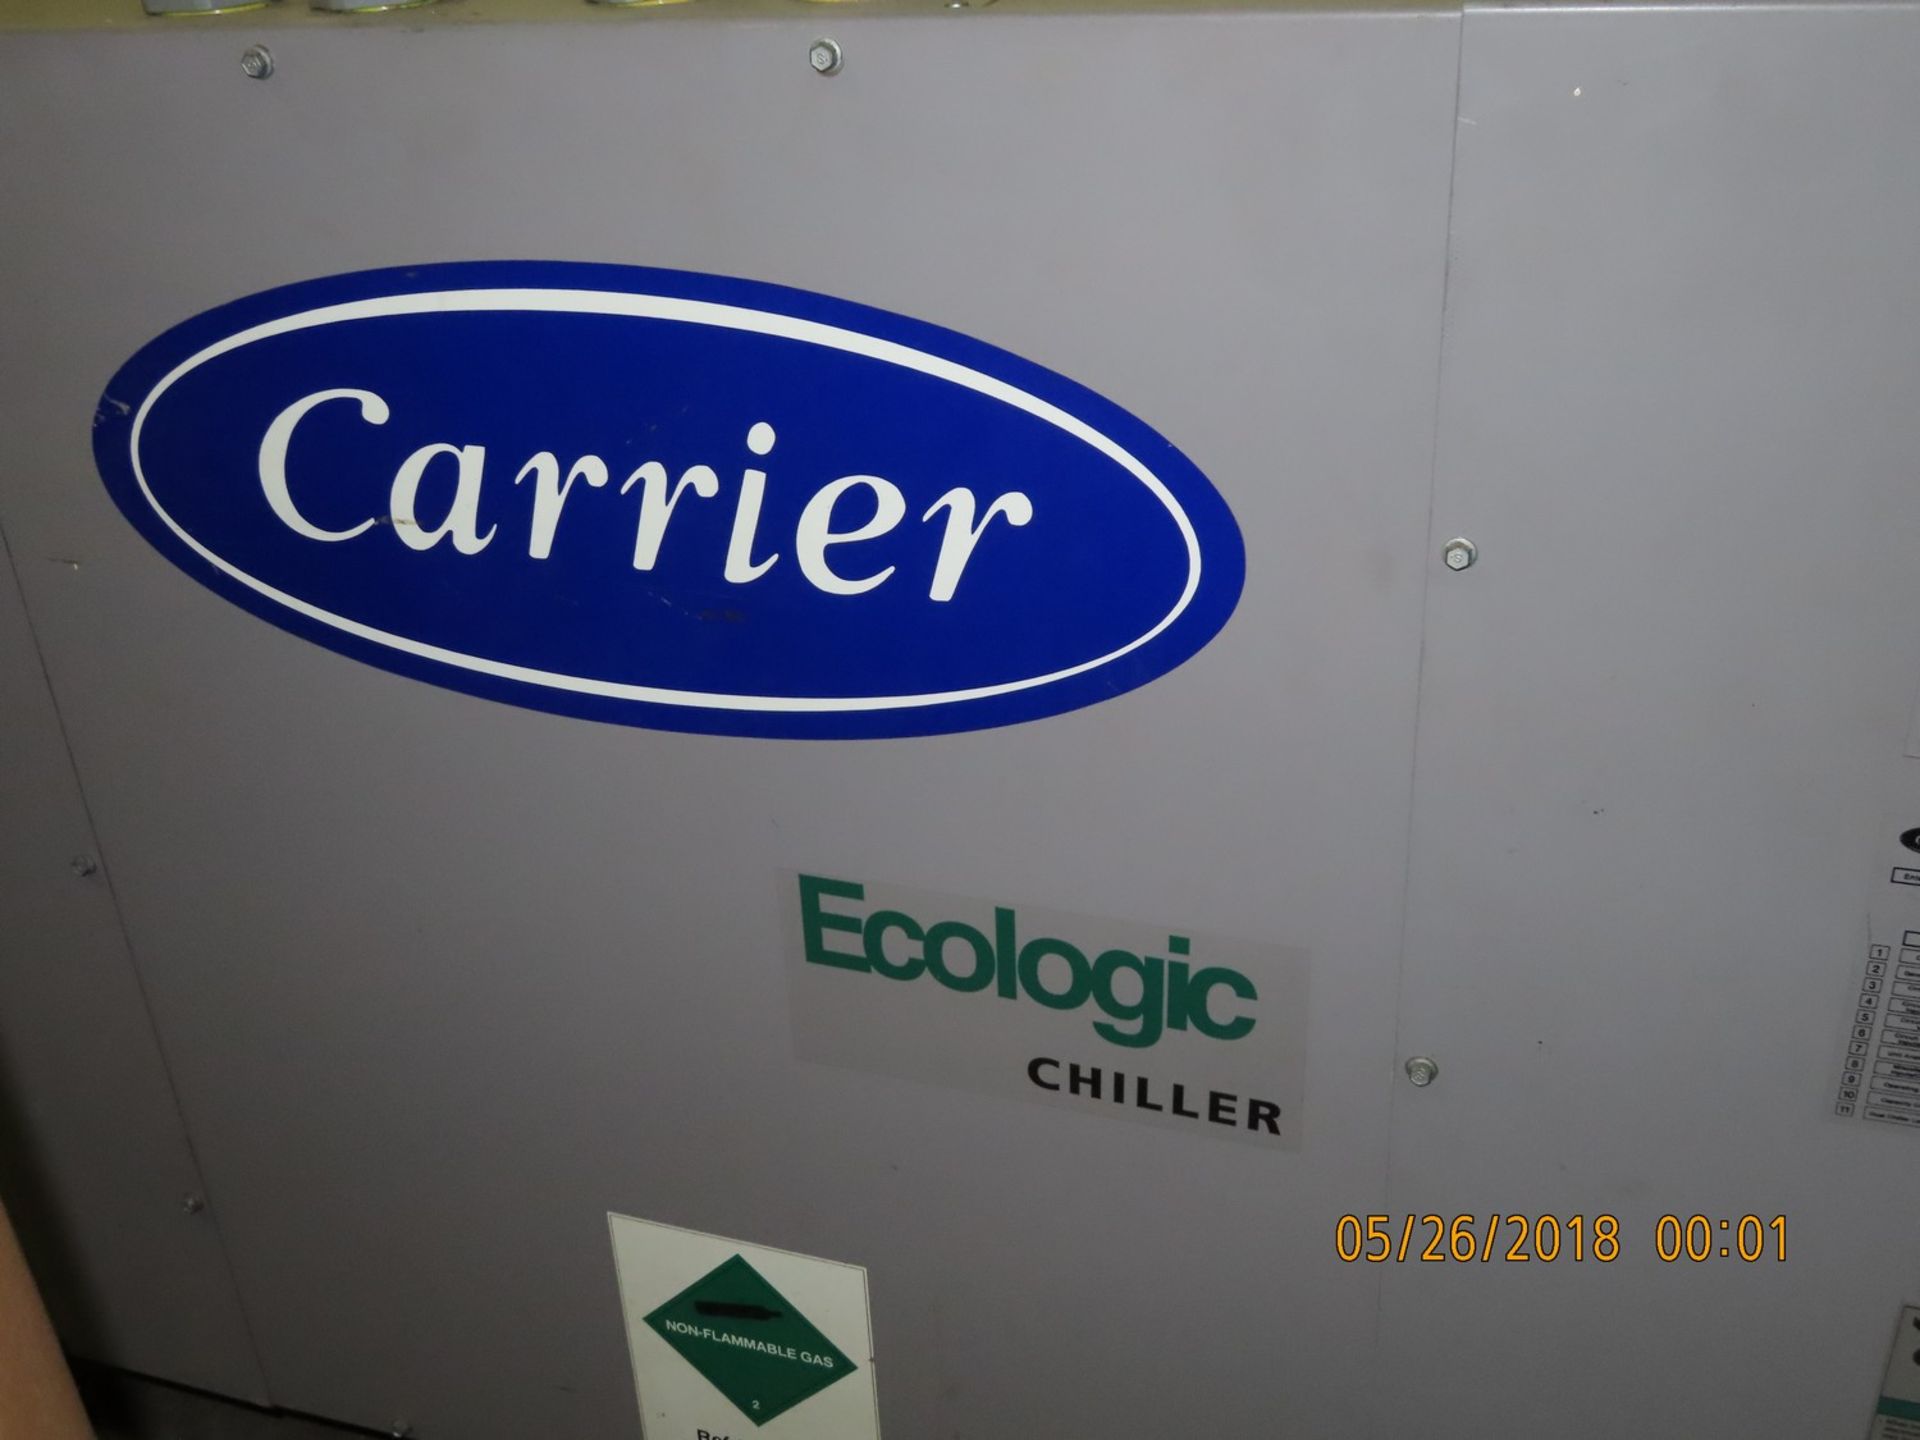 Water Chiller System Including (2) Carrier 30HXC116RY-630 Ecologic Chillers s/n 4499F60829 & - Image 4 of 9